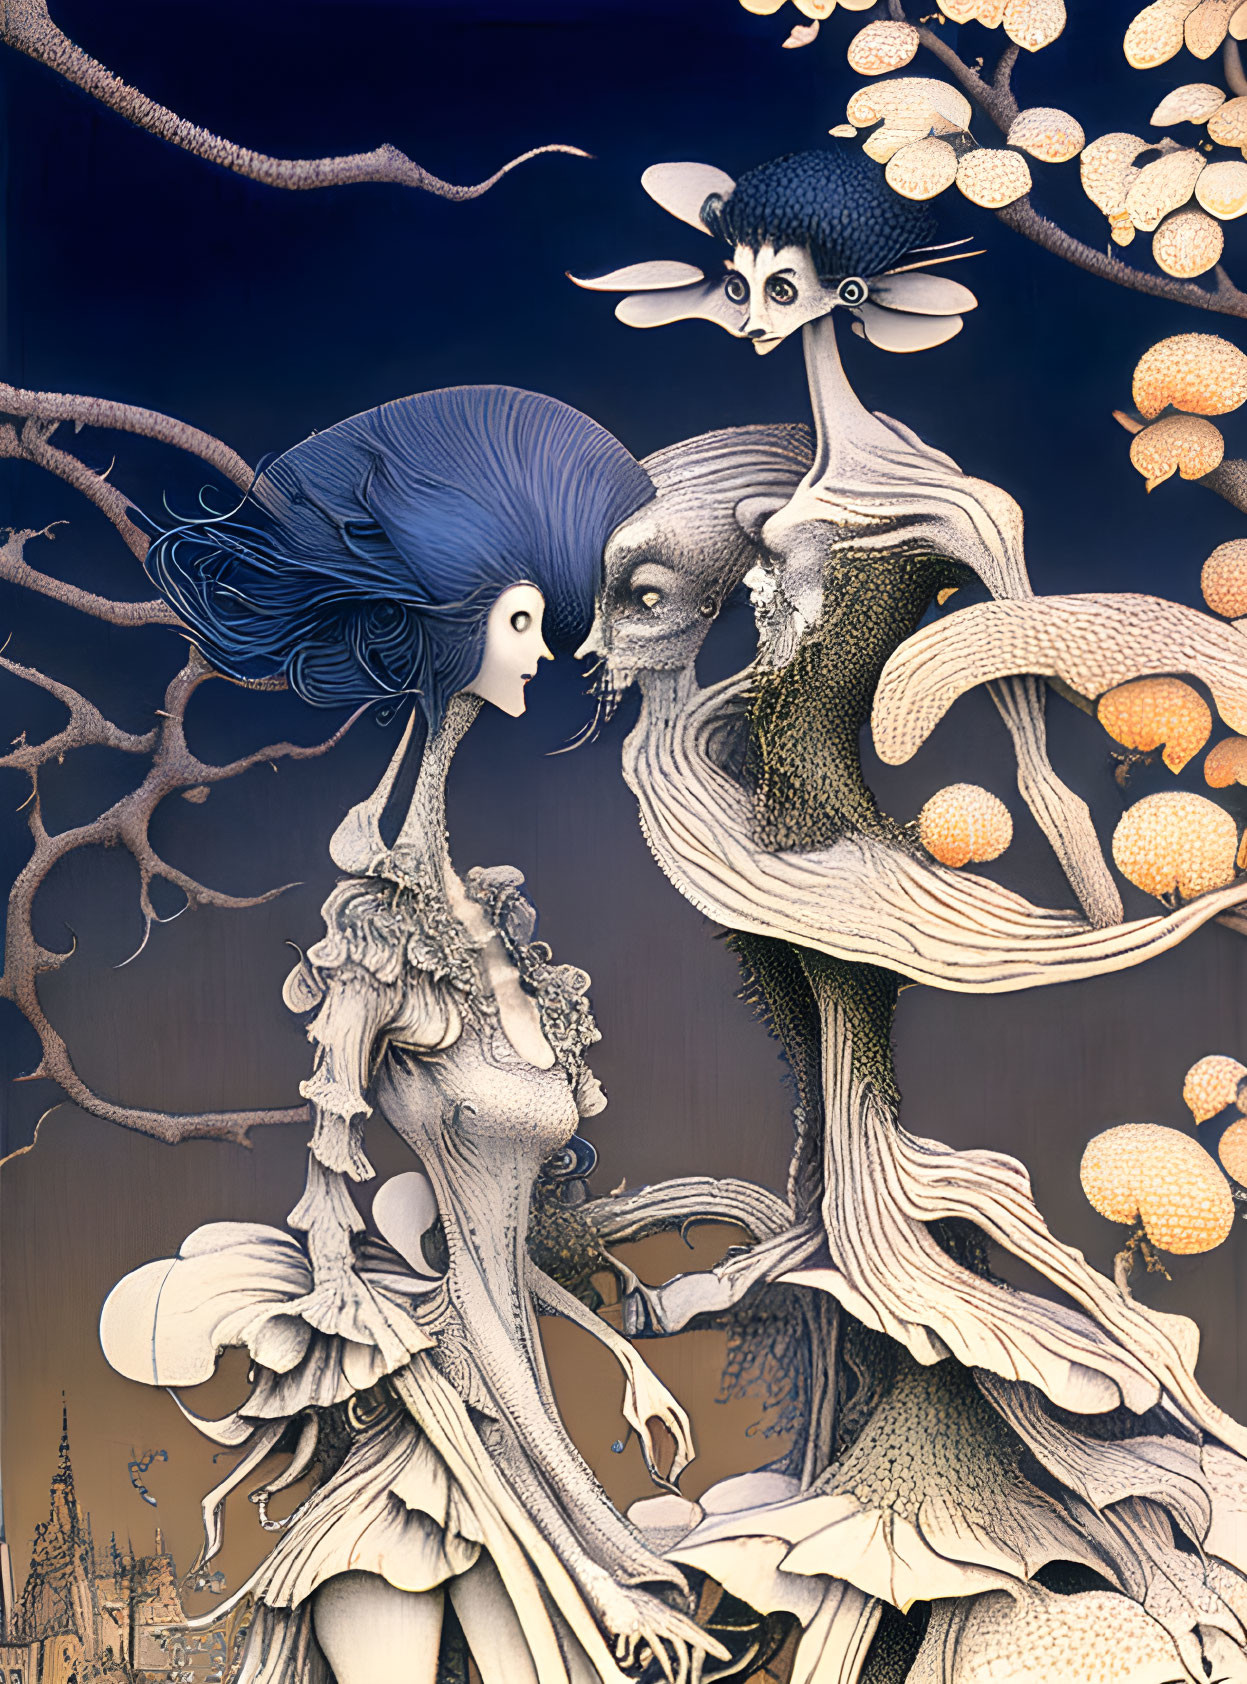 Surreal illustration of whimsical figures in tree-like setting